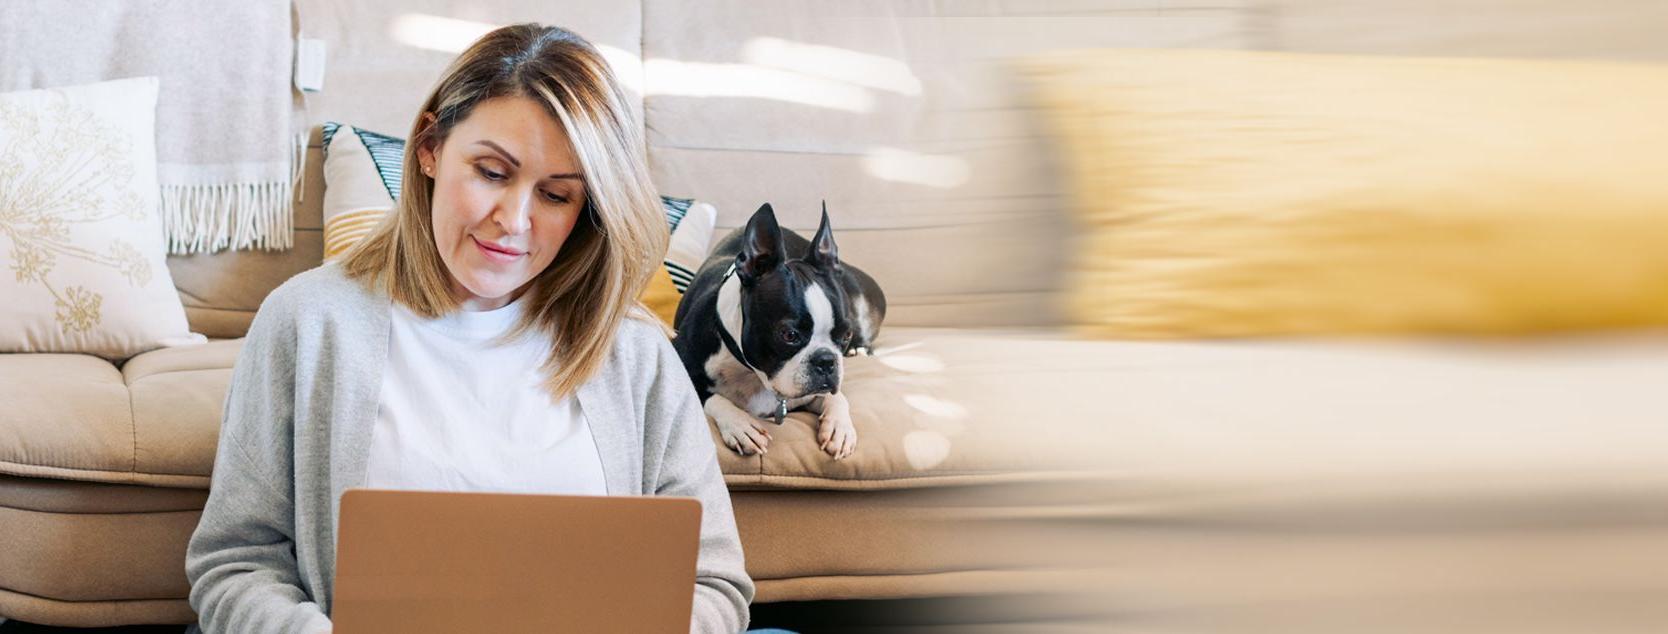 A woman manages her bank accounts from her laptop as her dog watches on